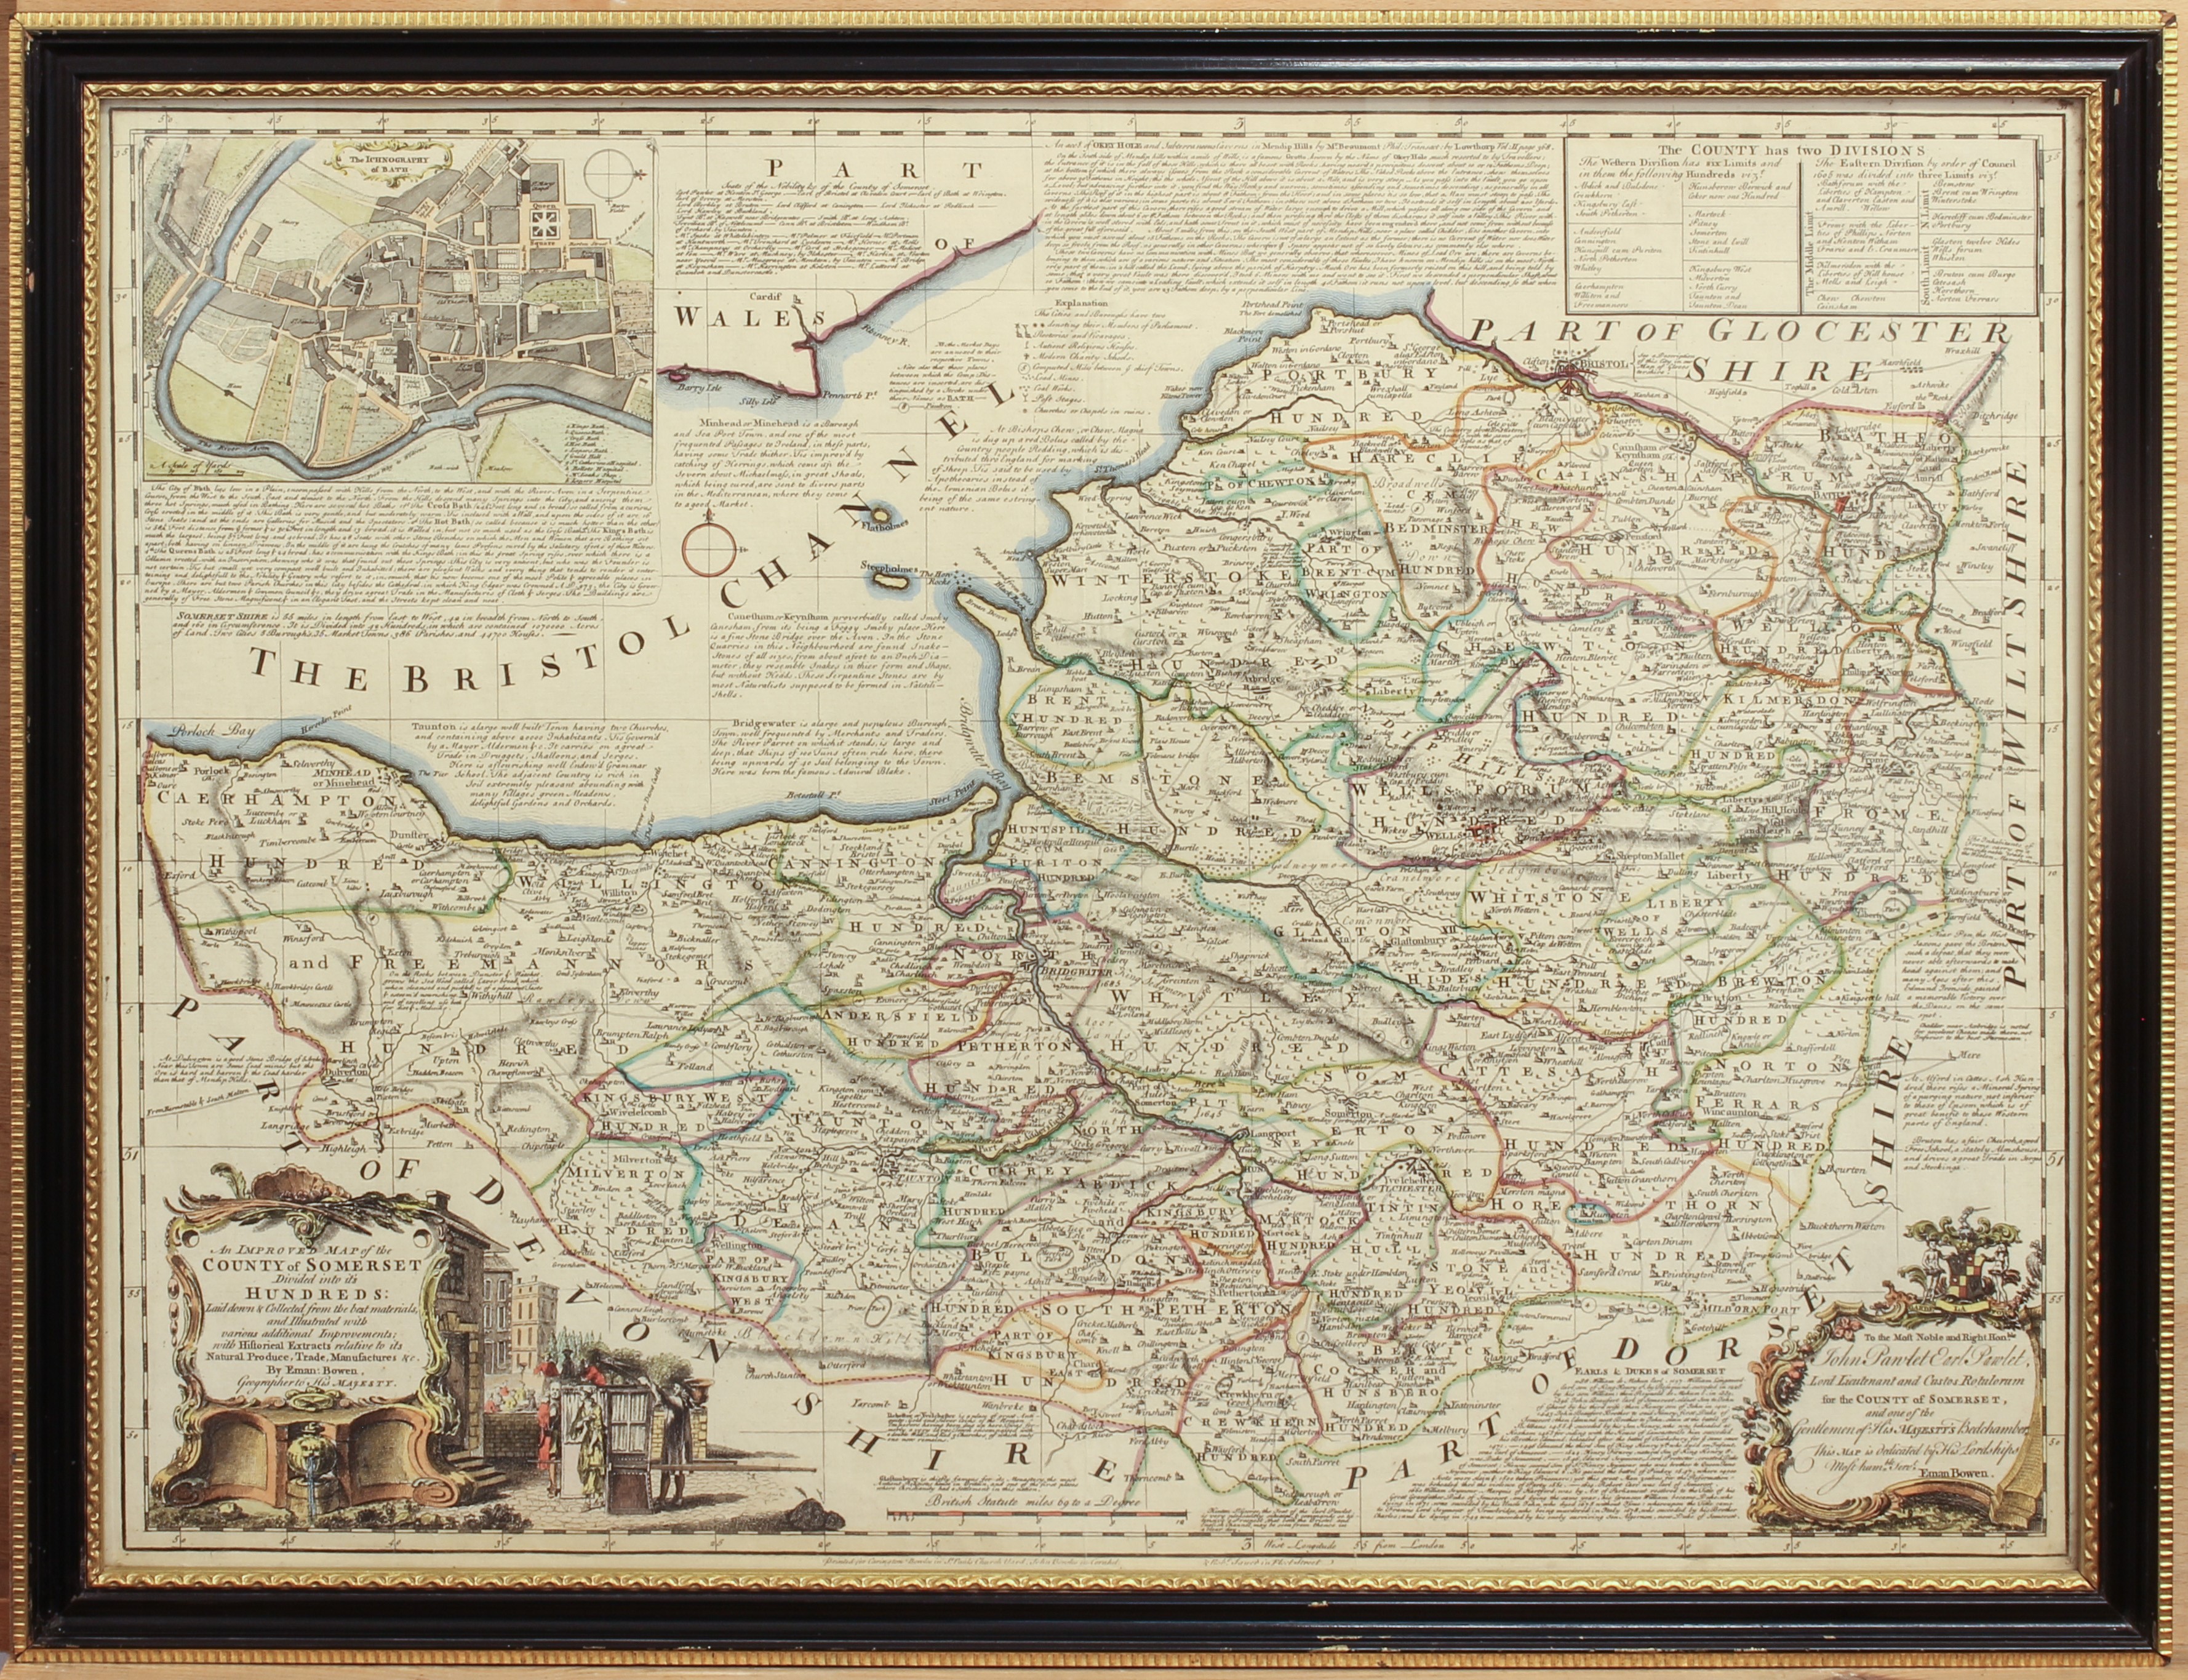 Emanuel Bowen (British, 1694-1767) 'An Improved Map of the County of Somerset Divided with its